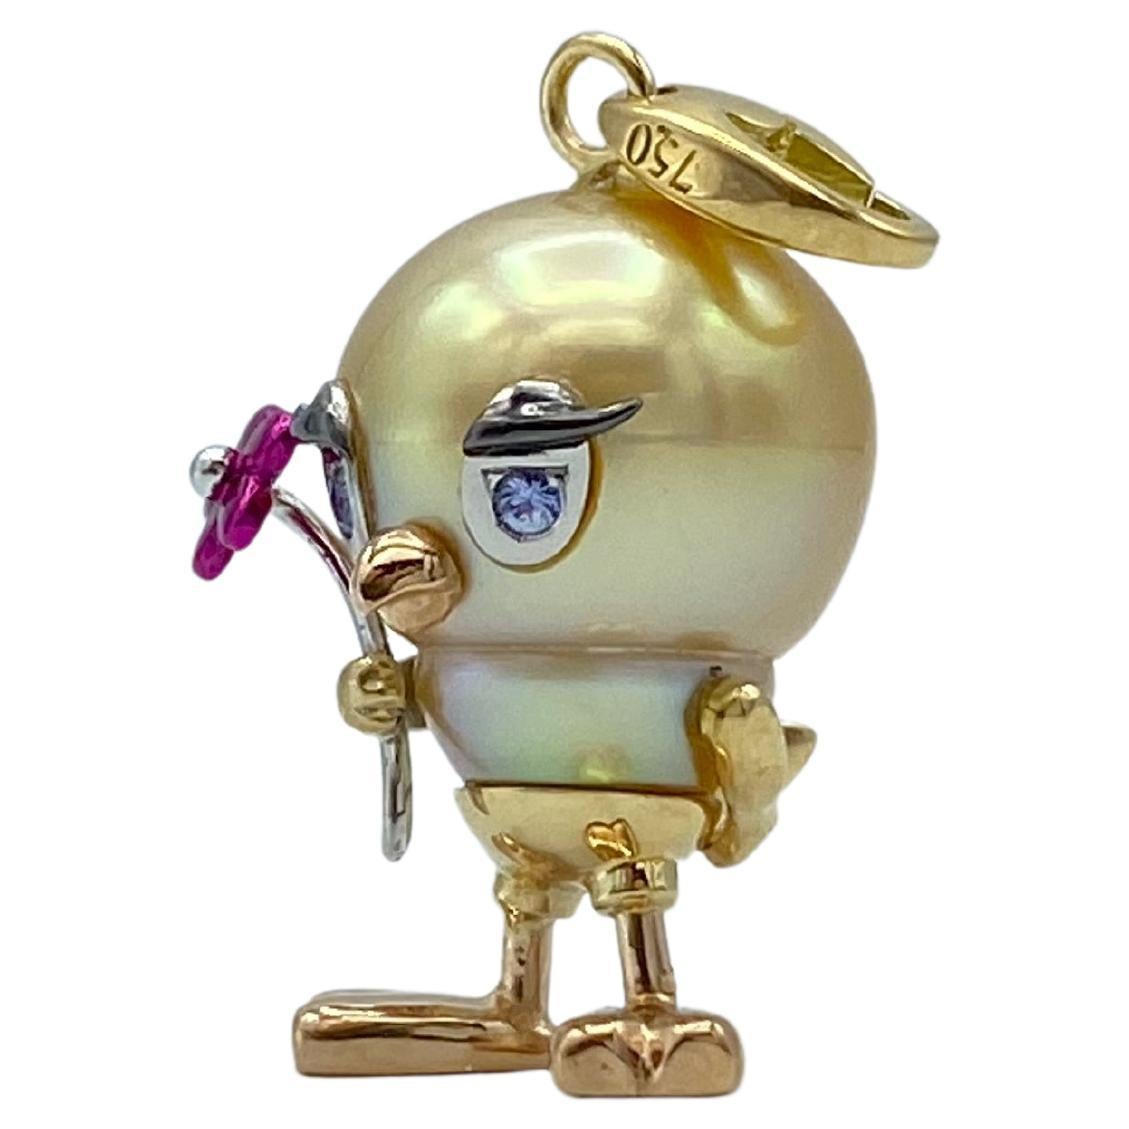 This pendant is made as if it were a caricature of a little bird, looks like Tweety.
The very beautiful Australian pearl is 16x14 mm.
The eyes set on white gold, are blue sapphires.
With his paw she holds a flower with fuchsia petals.
The legs and